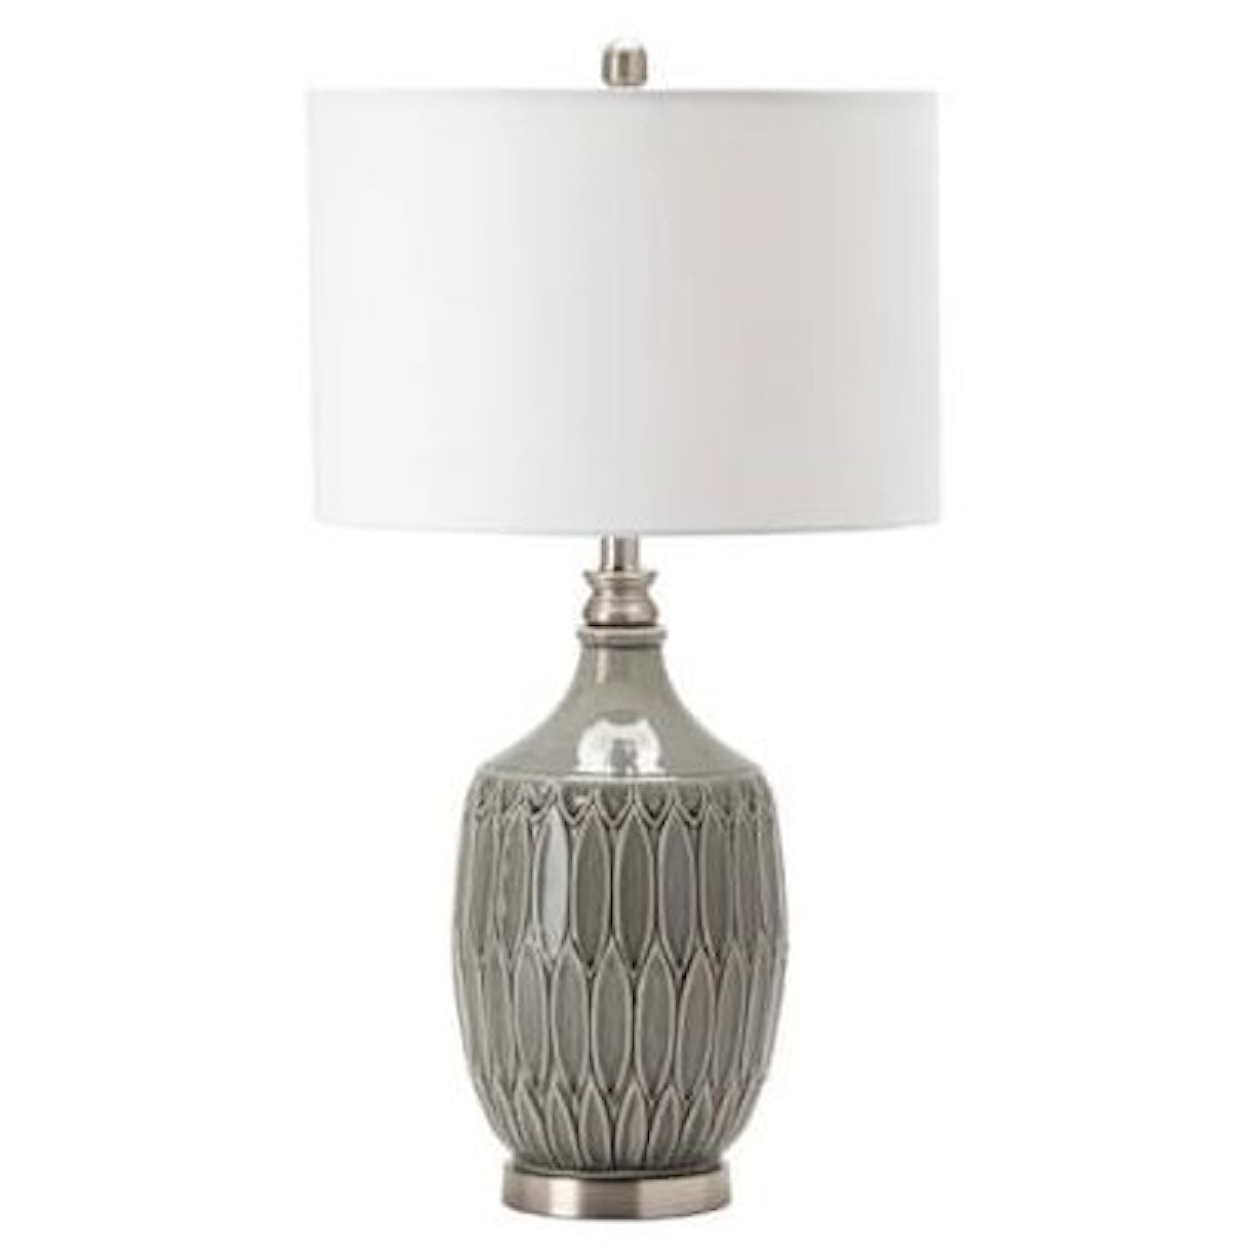 Crestview Collection Lighting Carlisle Table Lamp